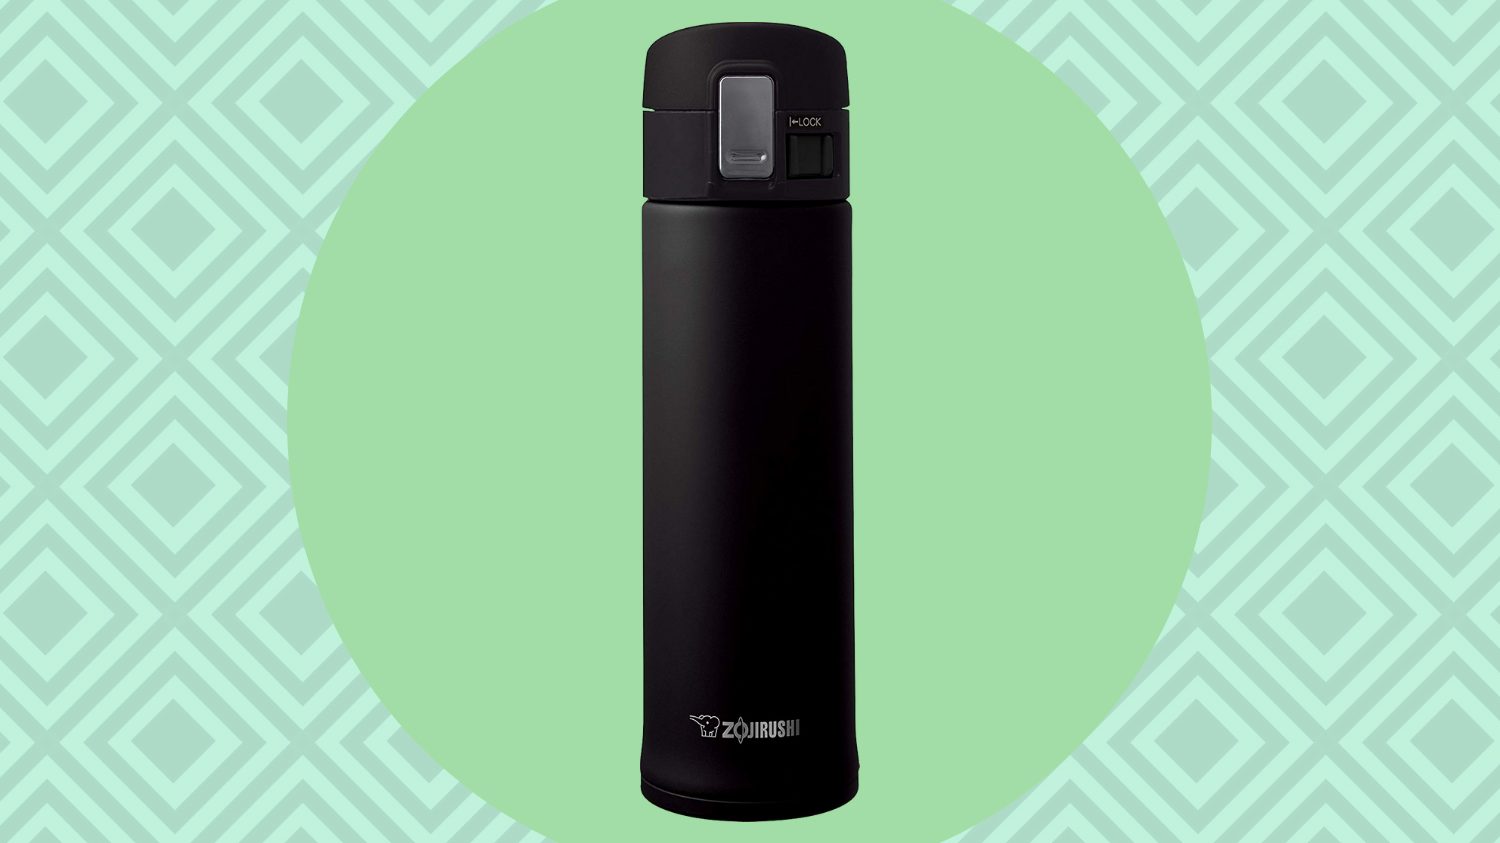 The Zojirushi  Travel Mug Lives Up to the Hype Read Our Review